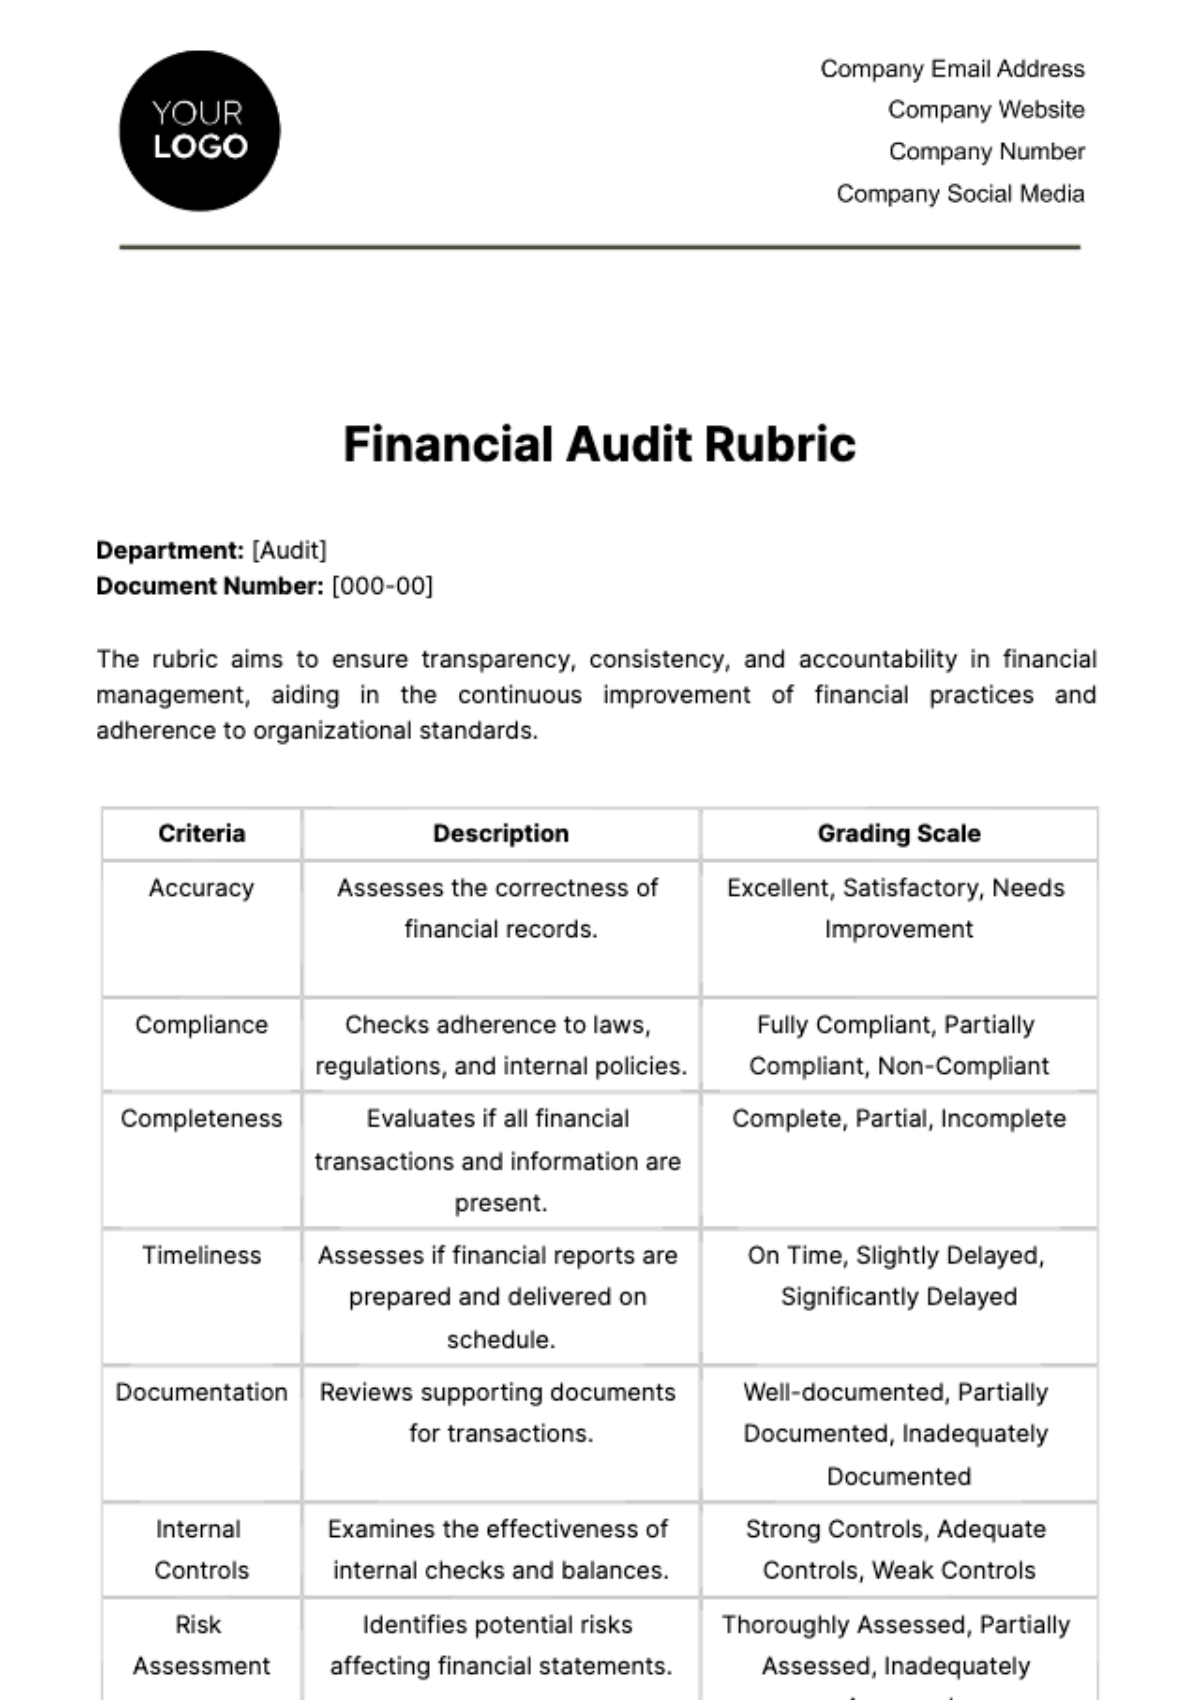 Financial Audit Rubric Template